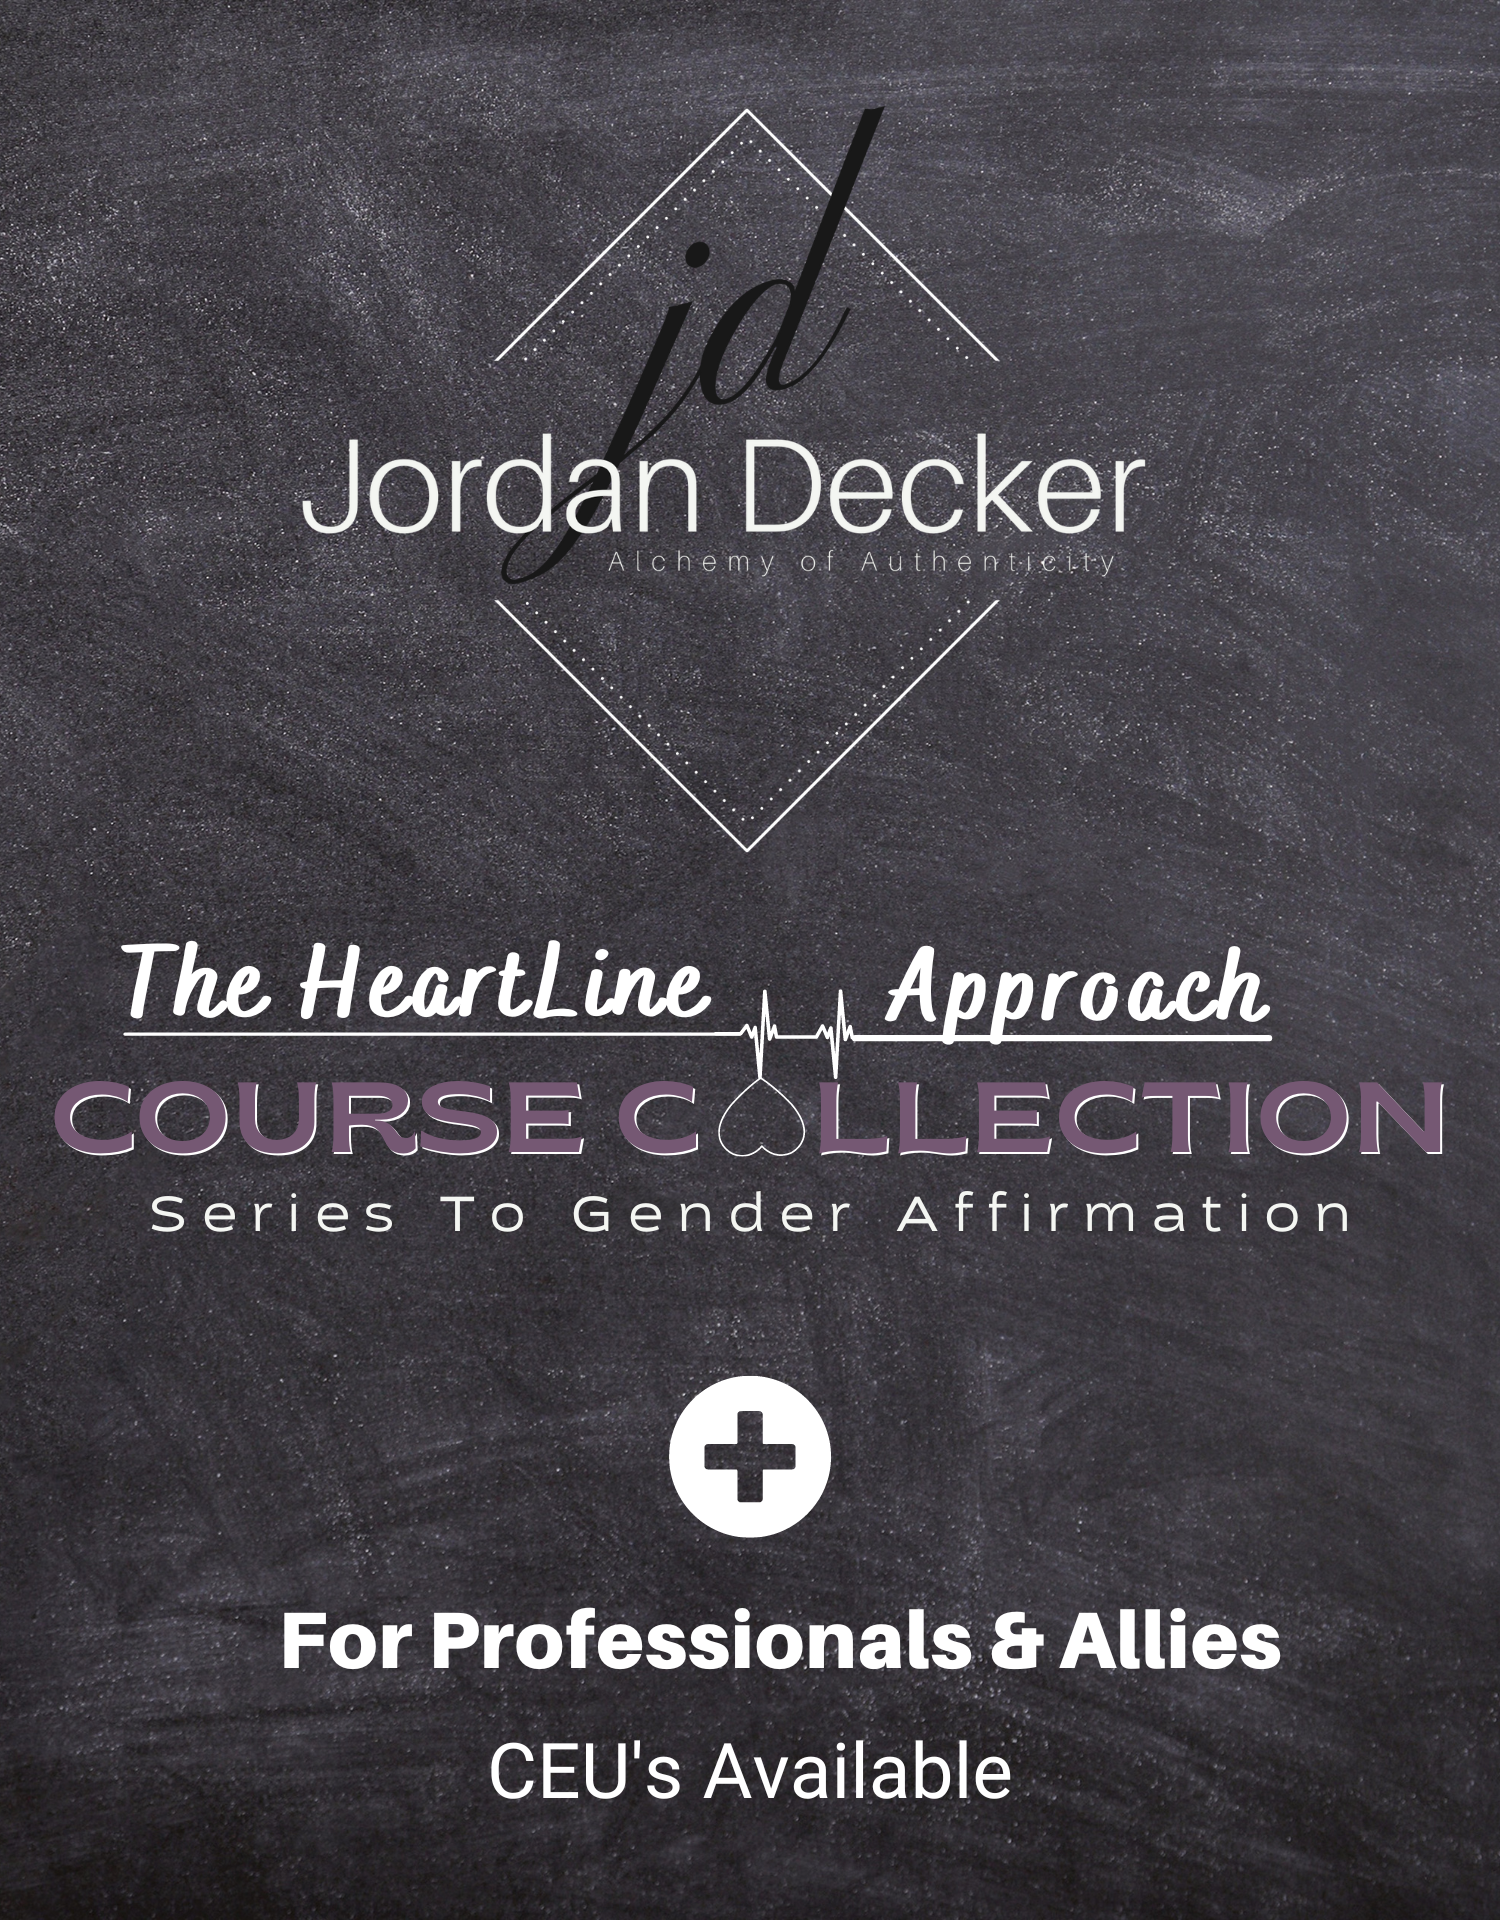 The Heartline Approach to Gender Affirmation for the Caregivers